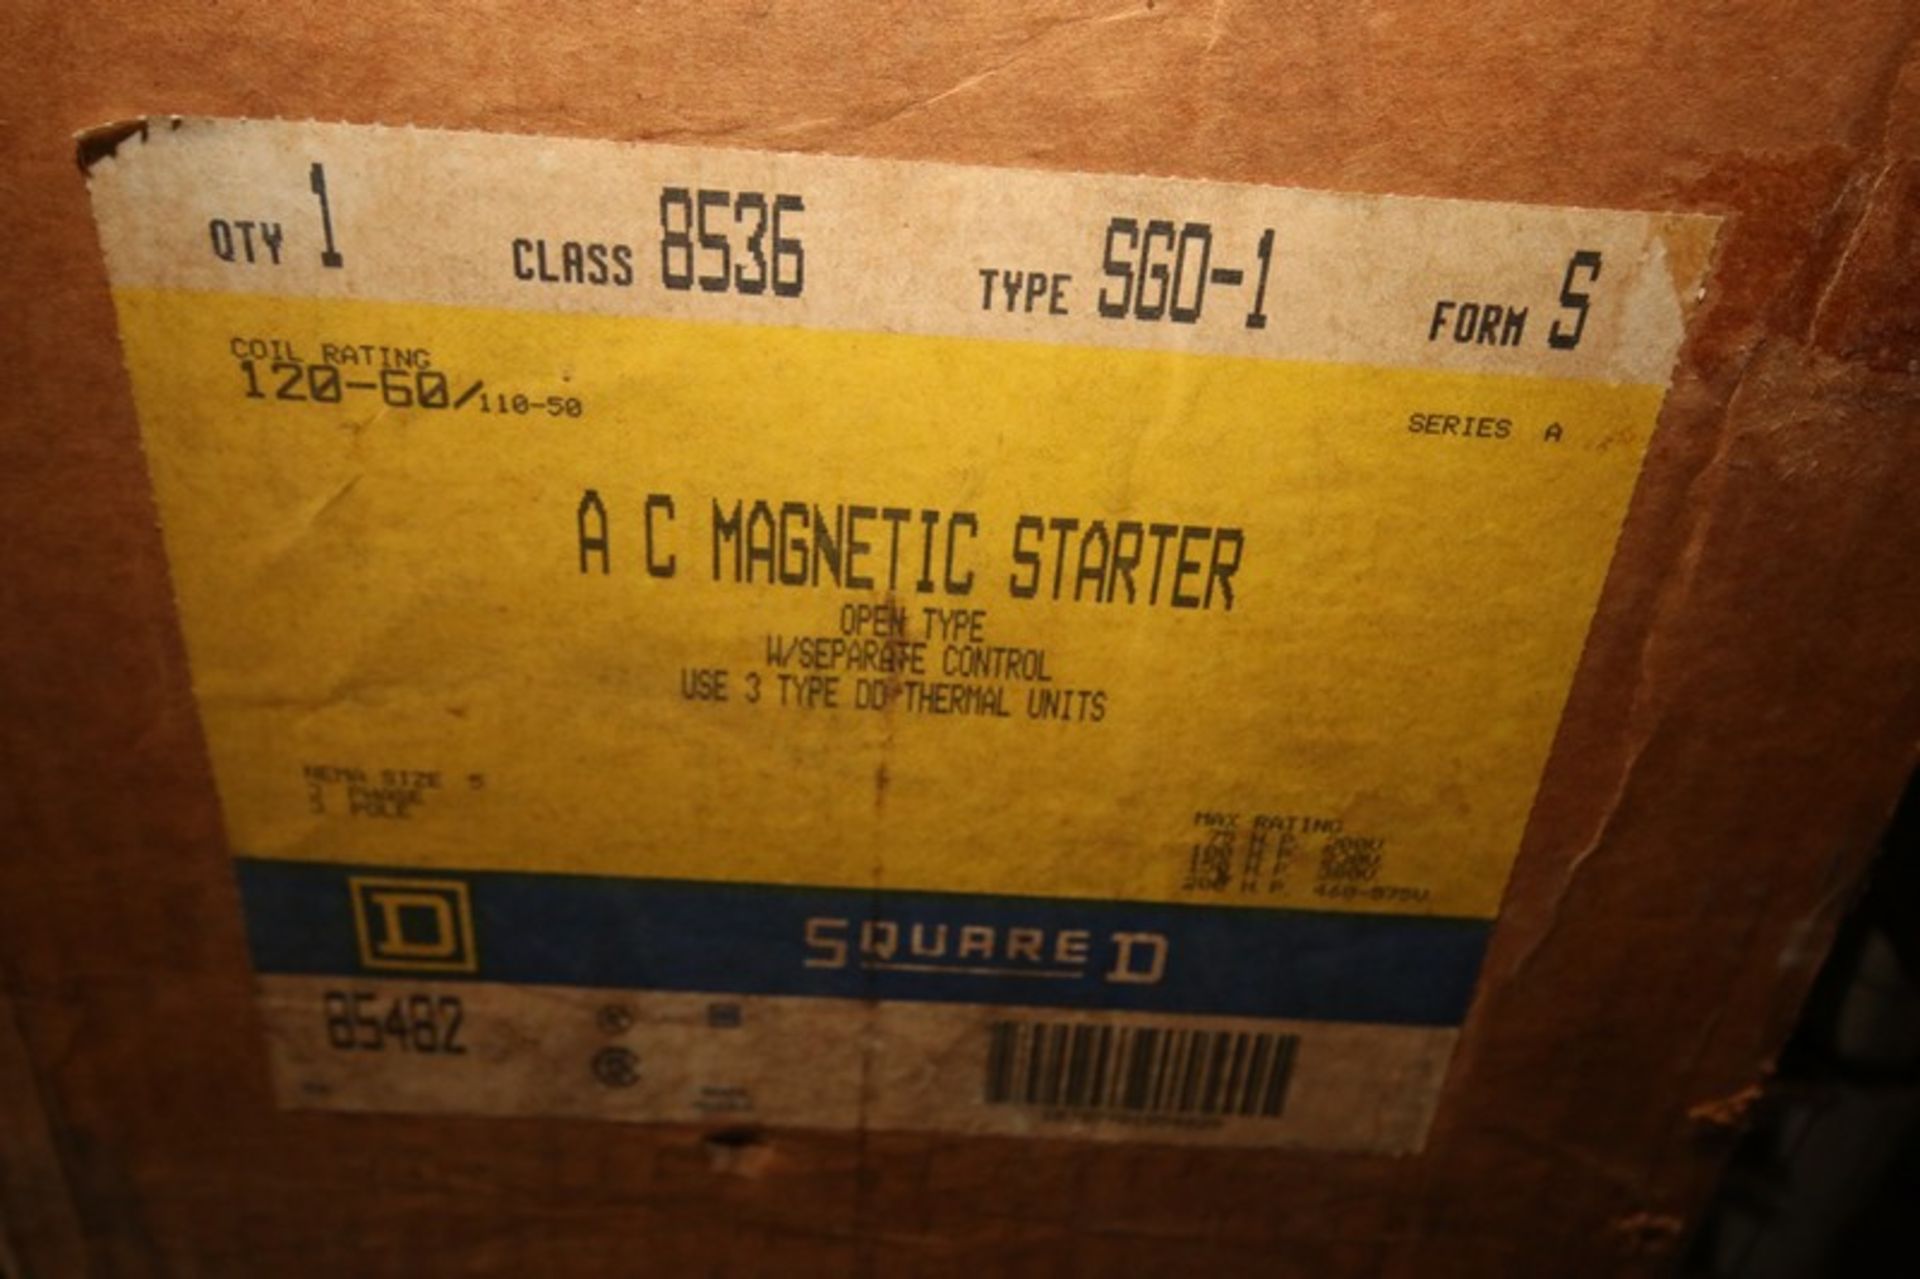 NIB Square D Size 5 AC Magnetic Starter, Class 8536, Type S60-1, Form S (INV#78008)(Located @ the - Bild 2 aus 2